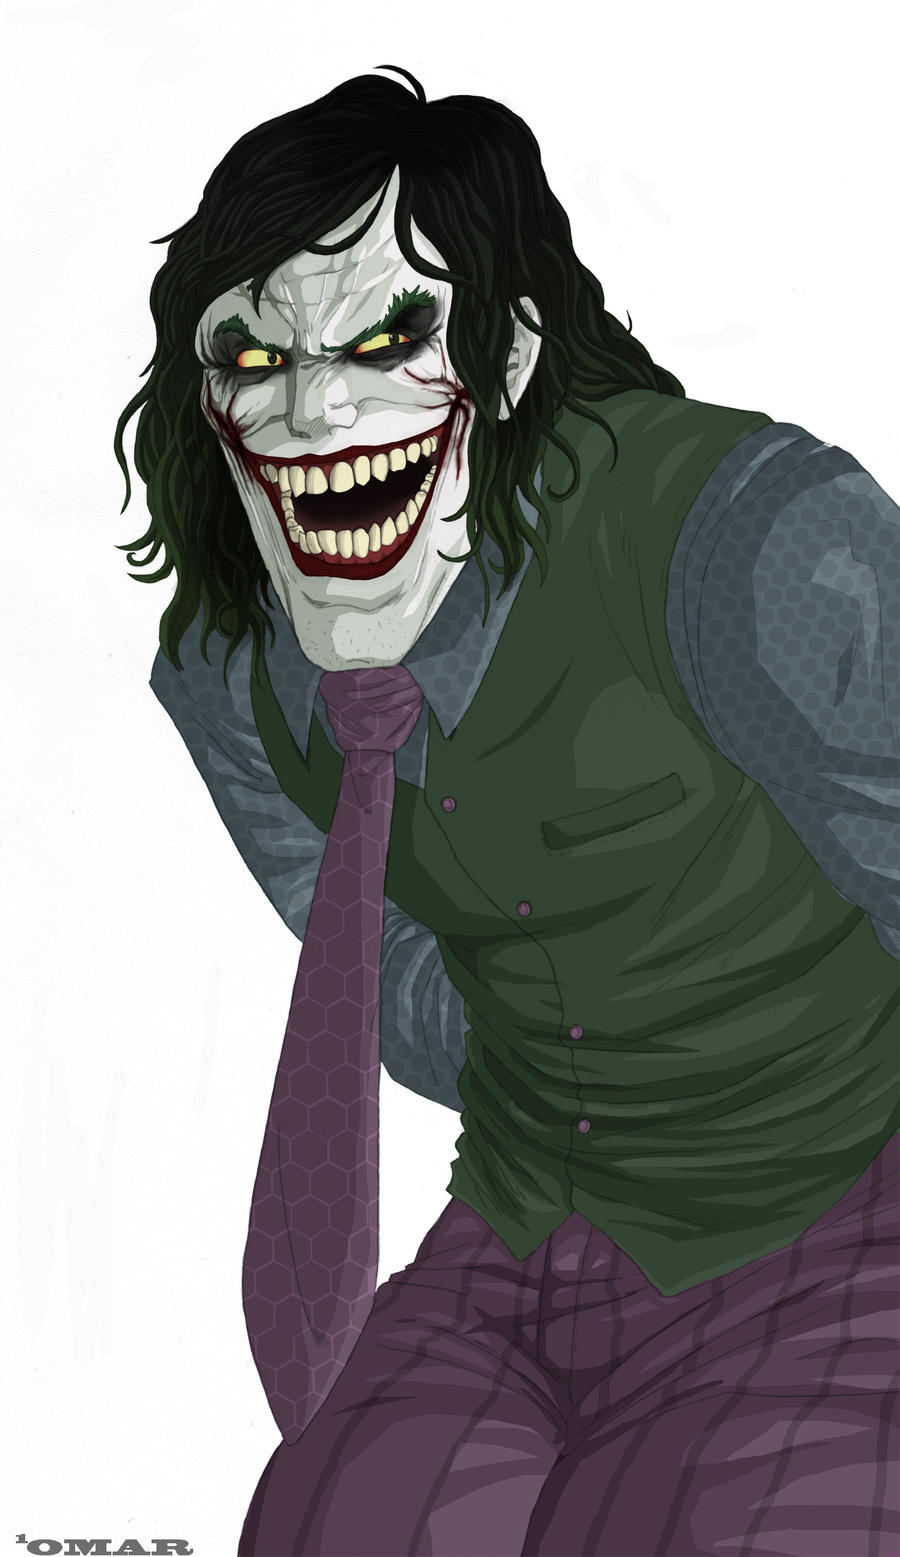 The laughing face of evil by OmaruIndustries on DeviantArt